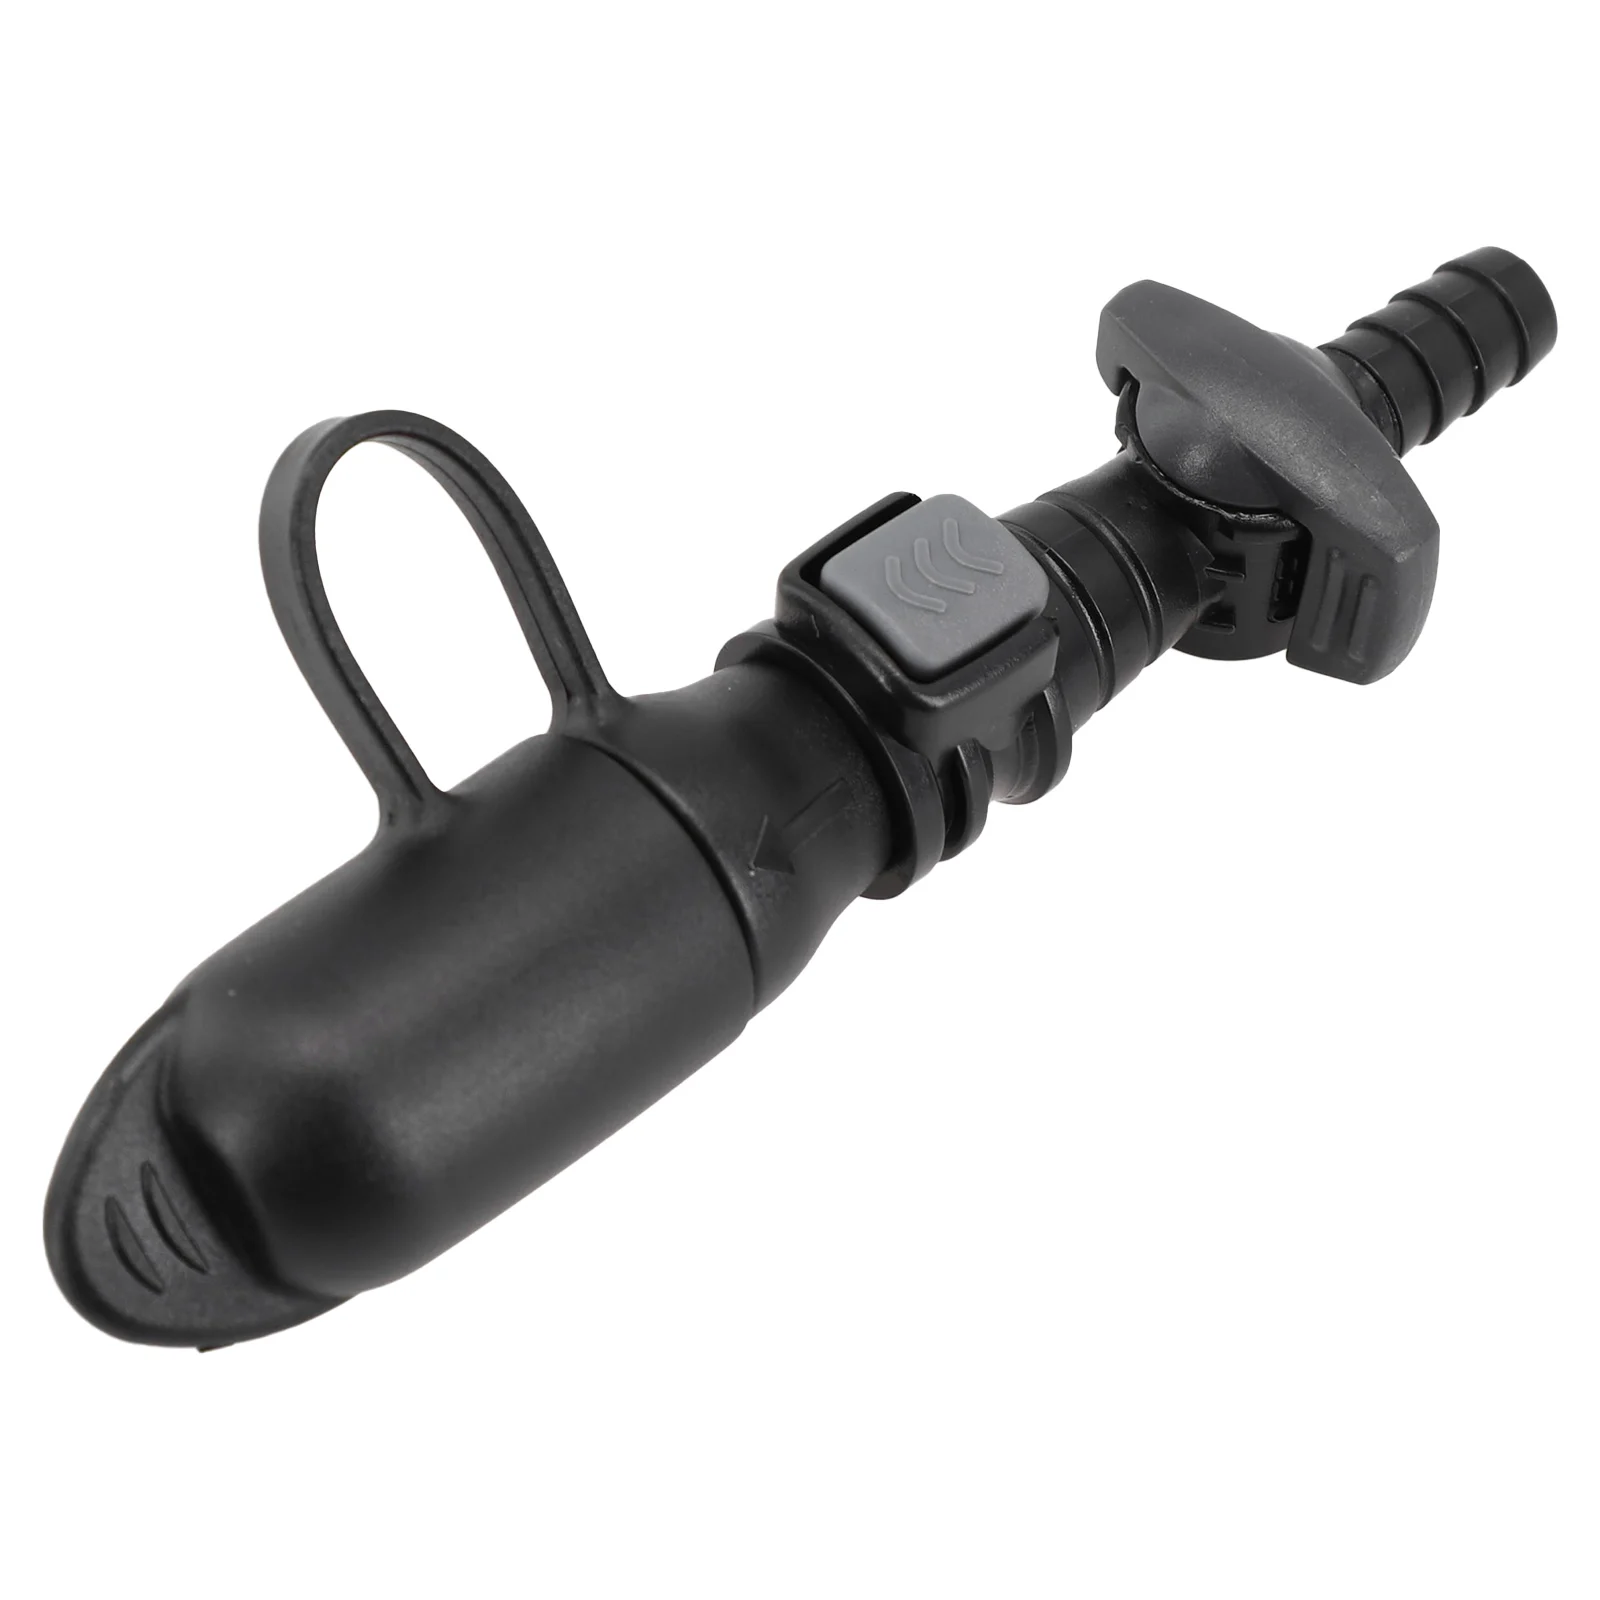 

High Quality Bite Valves With Cover Mouth Mouthpiece Outdoor Quick Release Water With Cover Bite Black Bladder